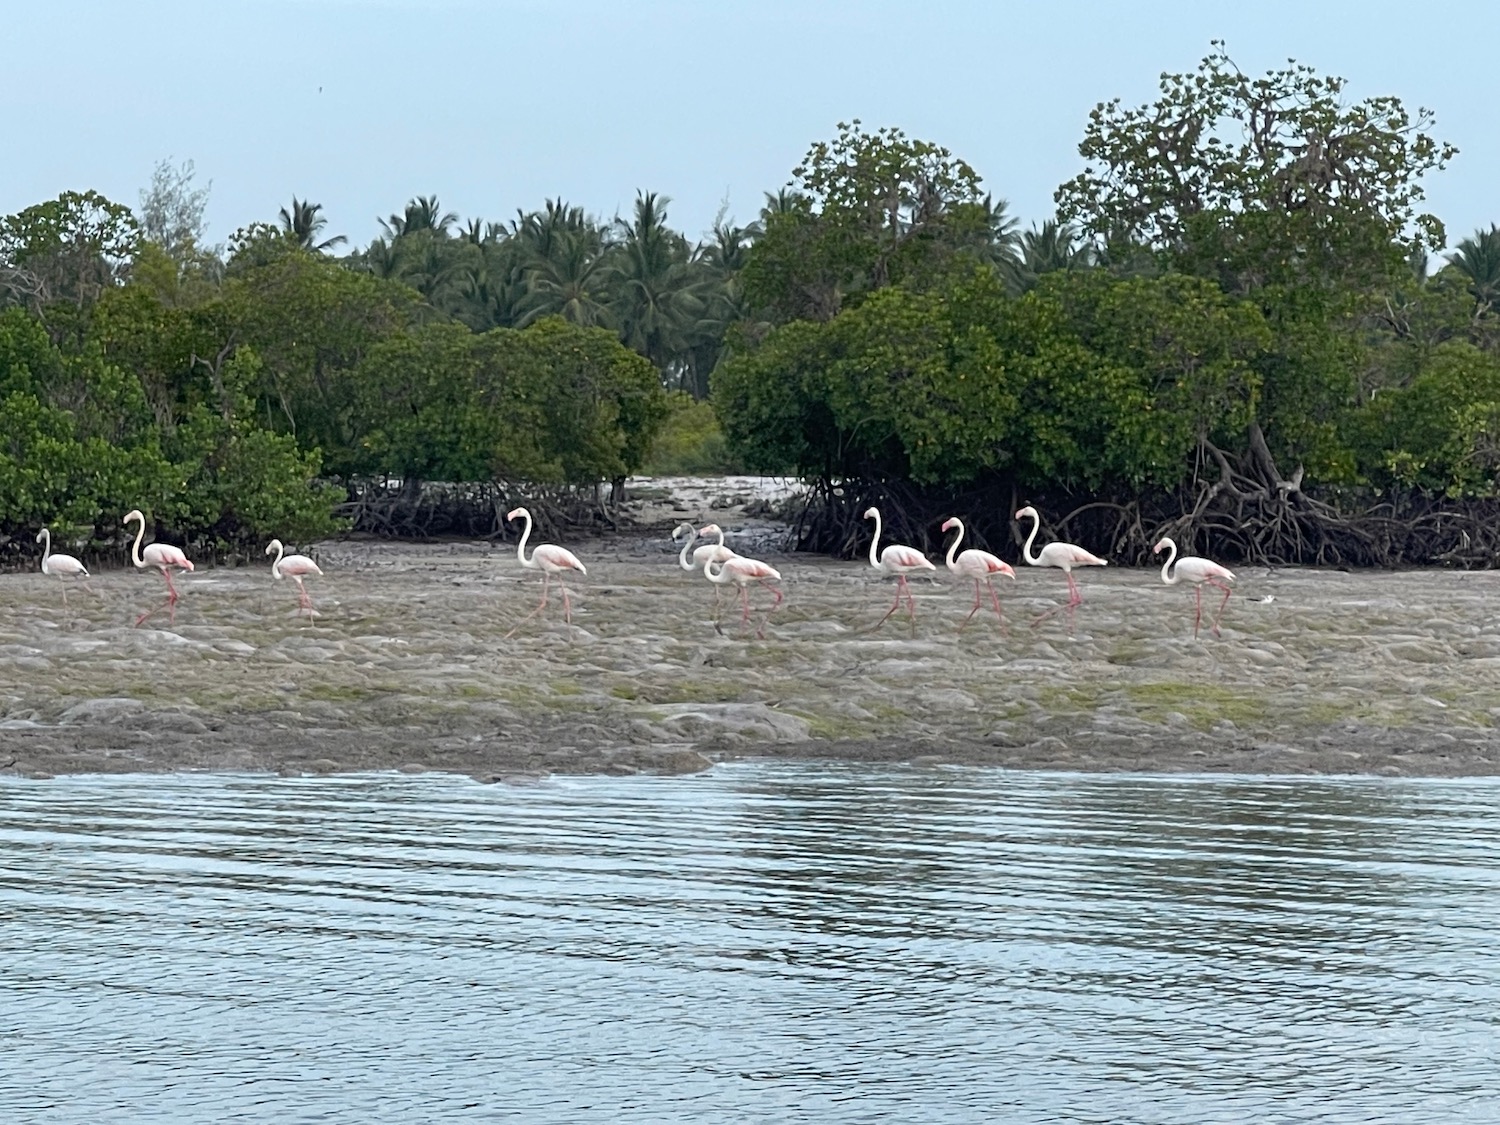 a group of flamingos on a rocky shore by water